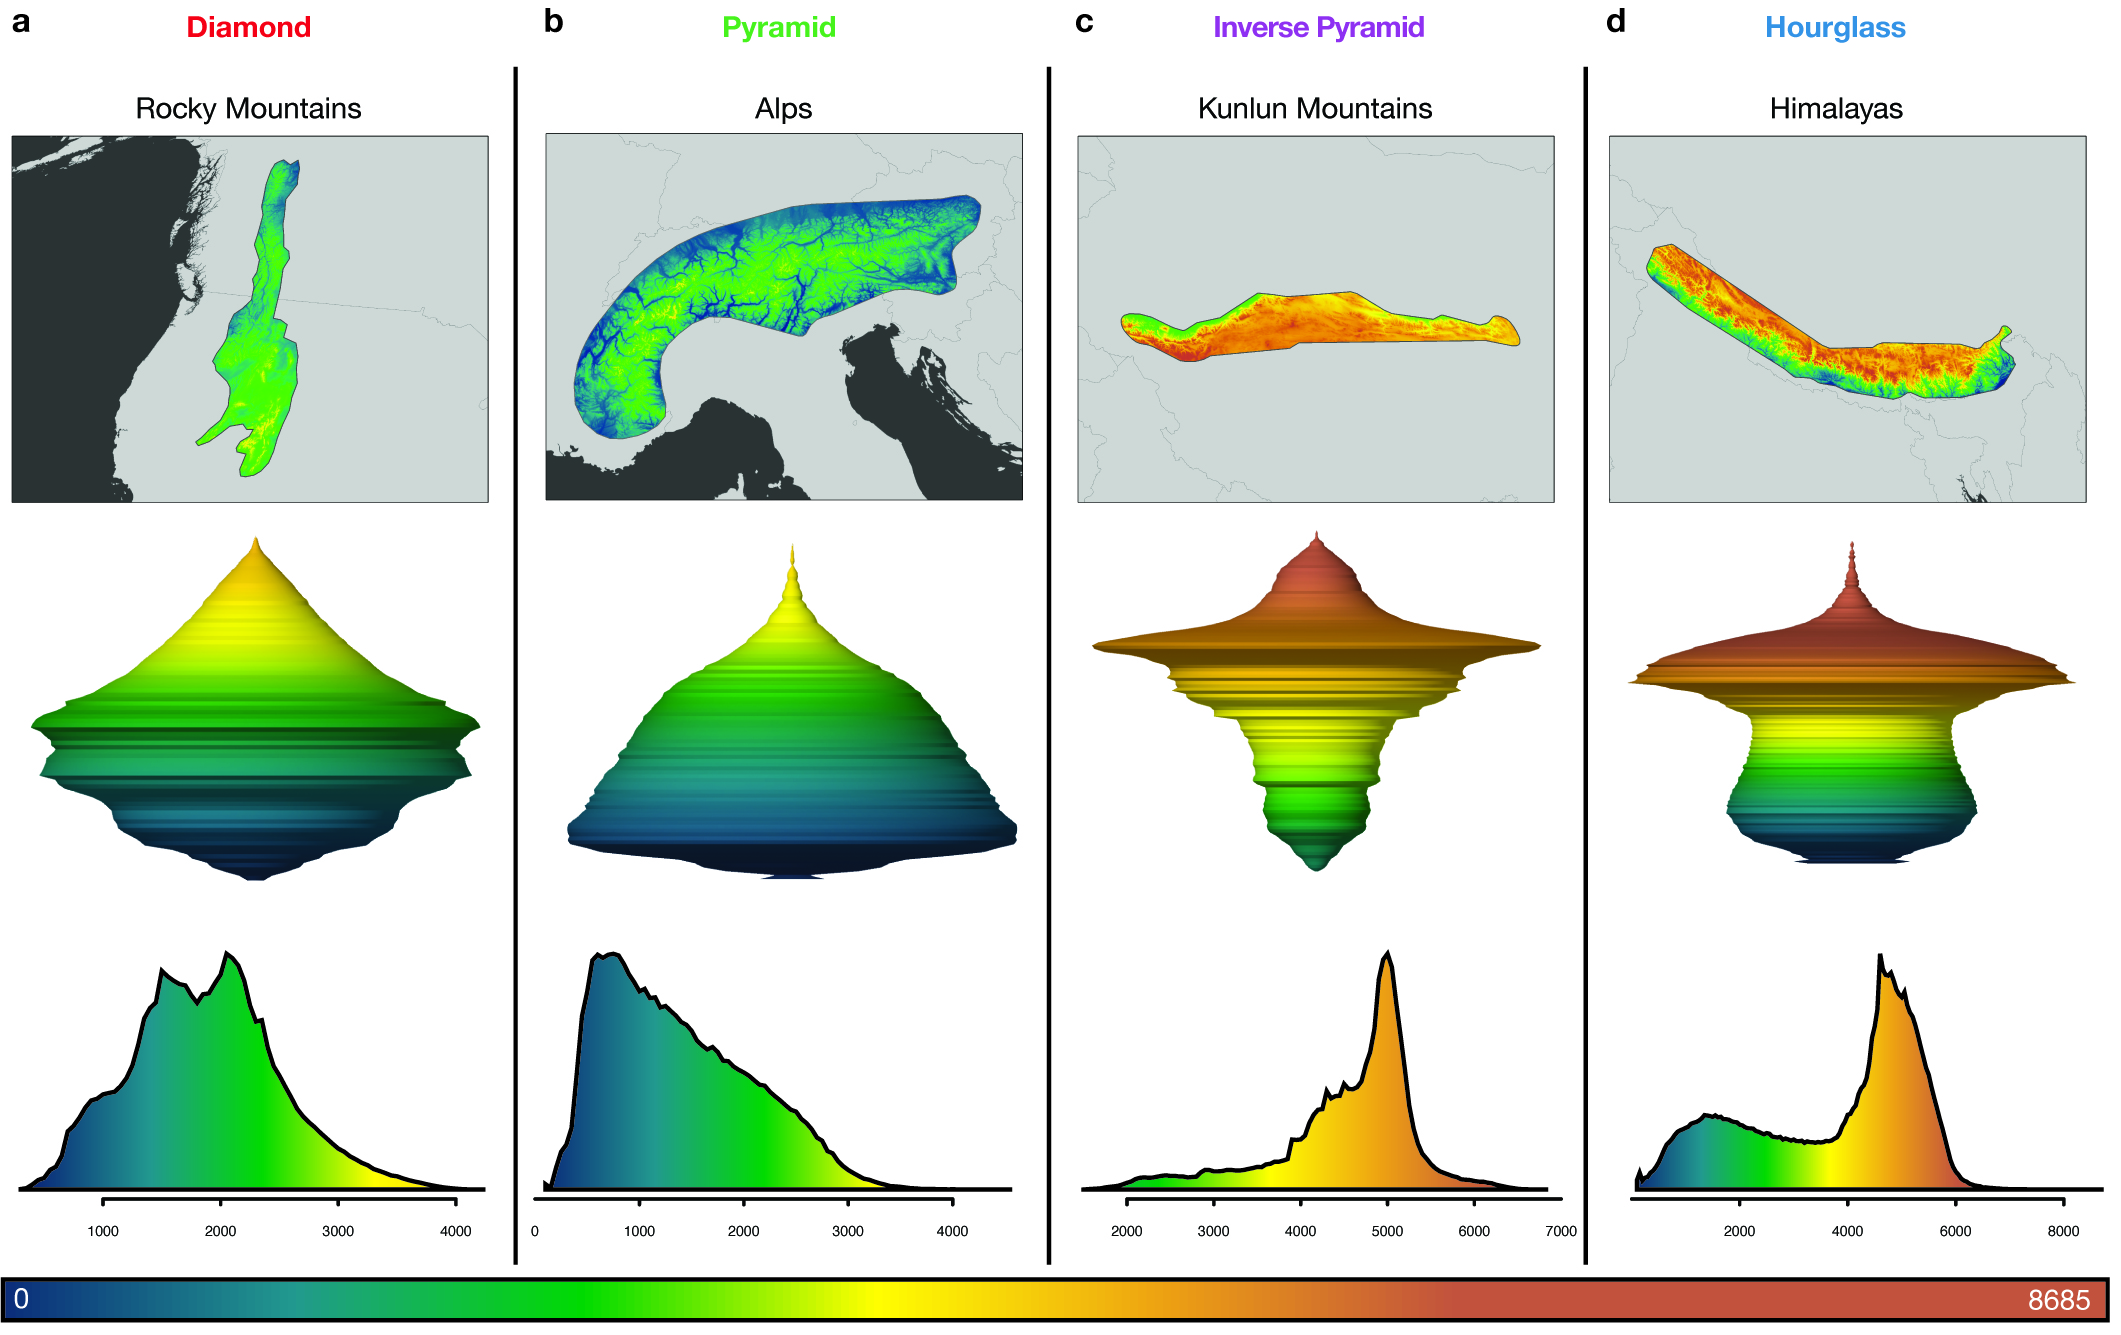 The researchers found that the 182 mountain ranges they studied have four principal shapes. Diamond-shaped ranges such as the Rocky Mountains (a) increase in land area from the bottom until mid-elevation before contracting quickly. Pyramid-shaped mountains such as the Alps (b) have sides that rise sharply and consistently decrease in area the higher they go. The Kunlun Mountains (c) of China take the form of inverse pyramids, which gradually expand in area as elevation increases before suddenly widening toward their peaks. For hourglass-shaped mountain ranges such as the Himalayas (d), land area rises slightly then decreases at mid-elevations before increasing sharply at higher elevations. The three-dimensional images (second row) represent each range shape as viewed from the side. Moving from bottom to top, the width of the shape changes to represent an increase or decrease in area at a specific elevation. Elevation spans from zero to more than 8,685 meters (28,494 feet), and is denoted by the color scale from blue (lowest elevation) to brown (highest elevation). (Image by Paul Elsen, Princeton University Department of Ecology and Evolutionary Biology; Morgan Tingley, University of Connecticut; and Mike Costelloe)